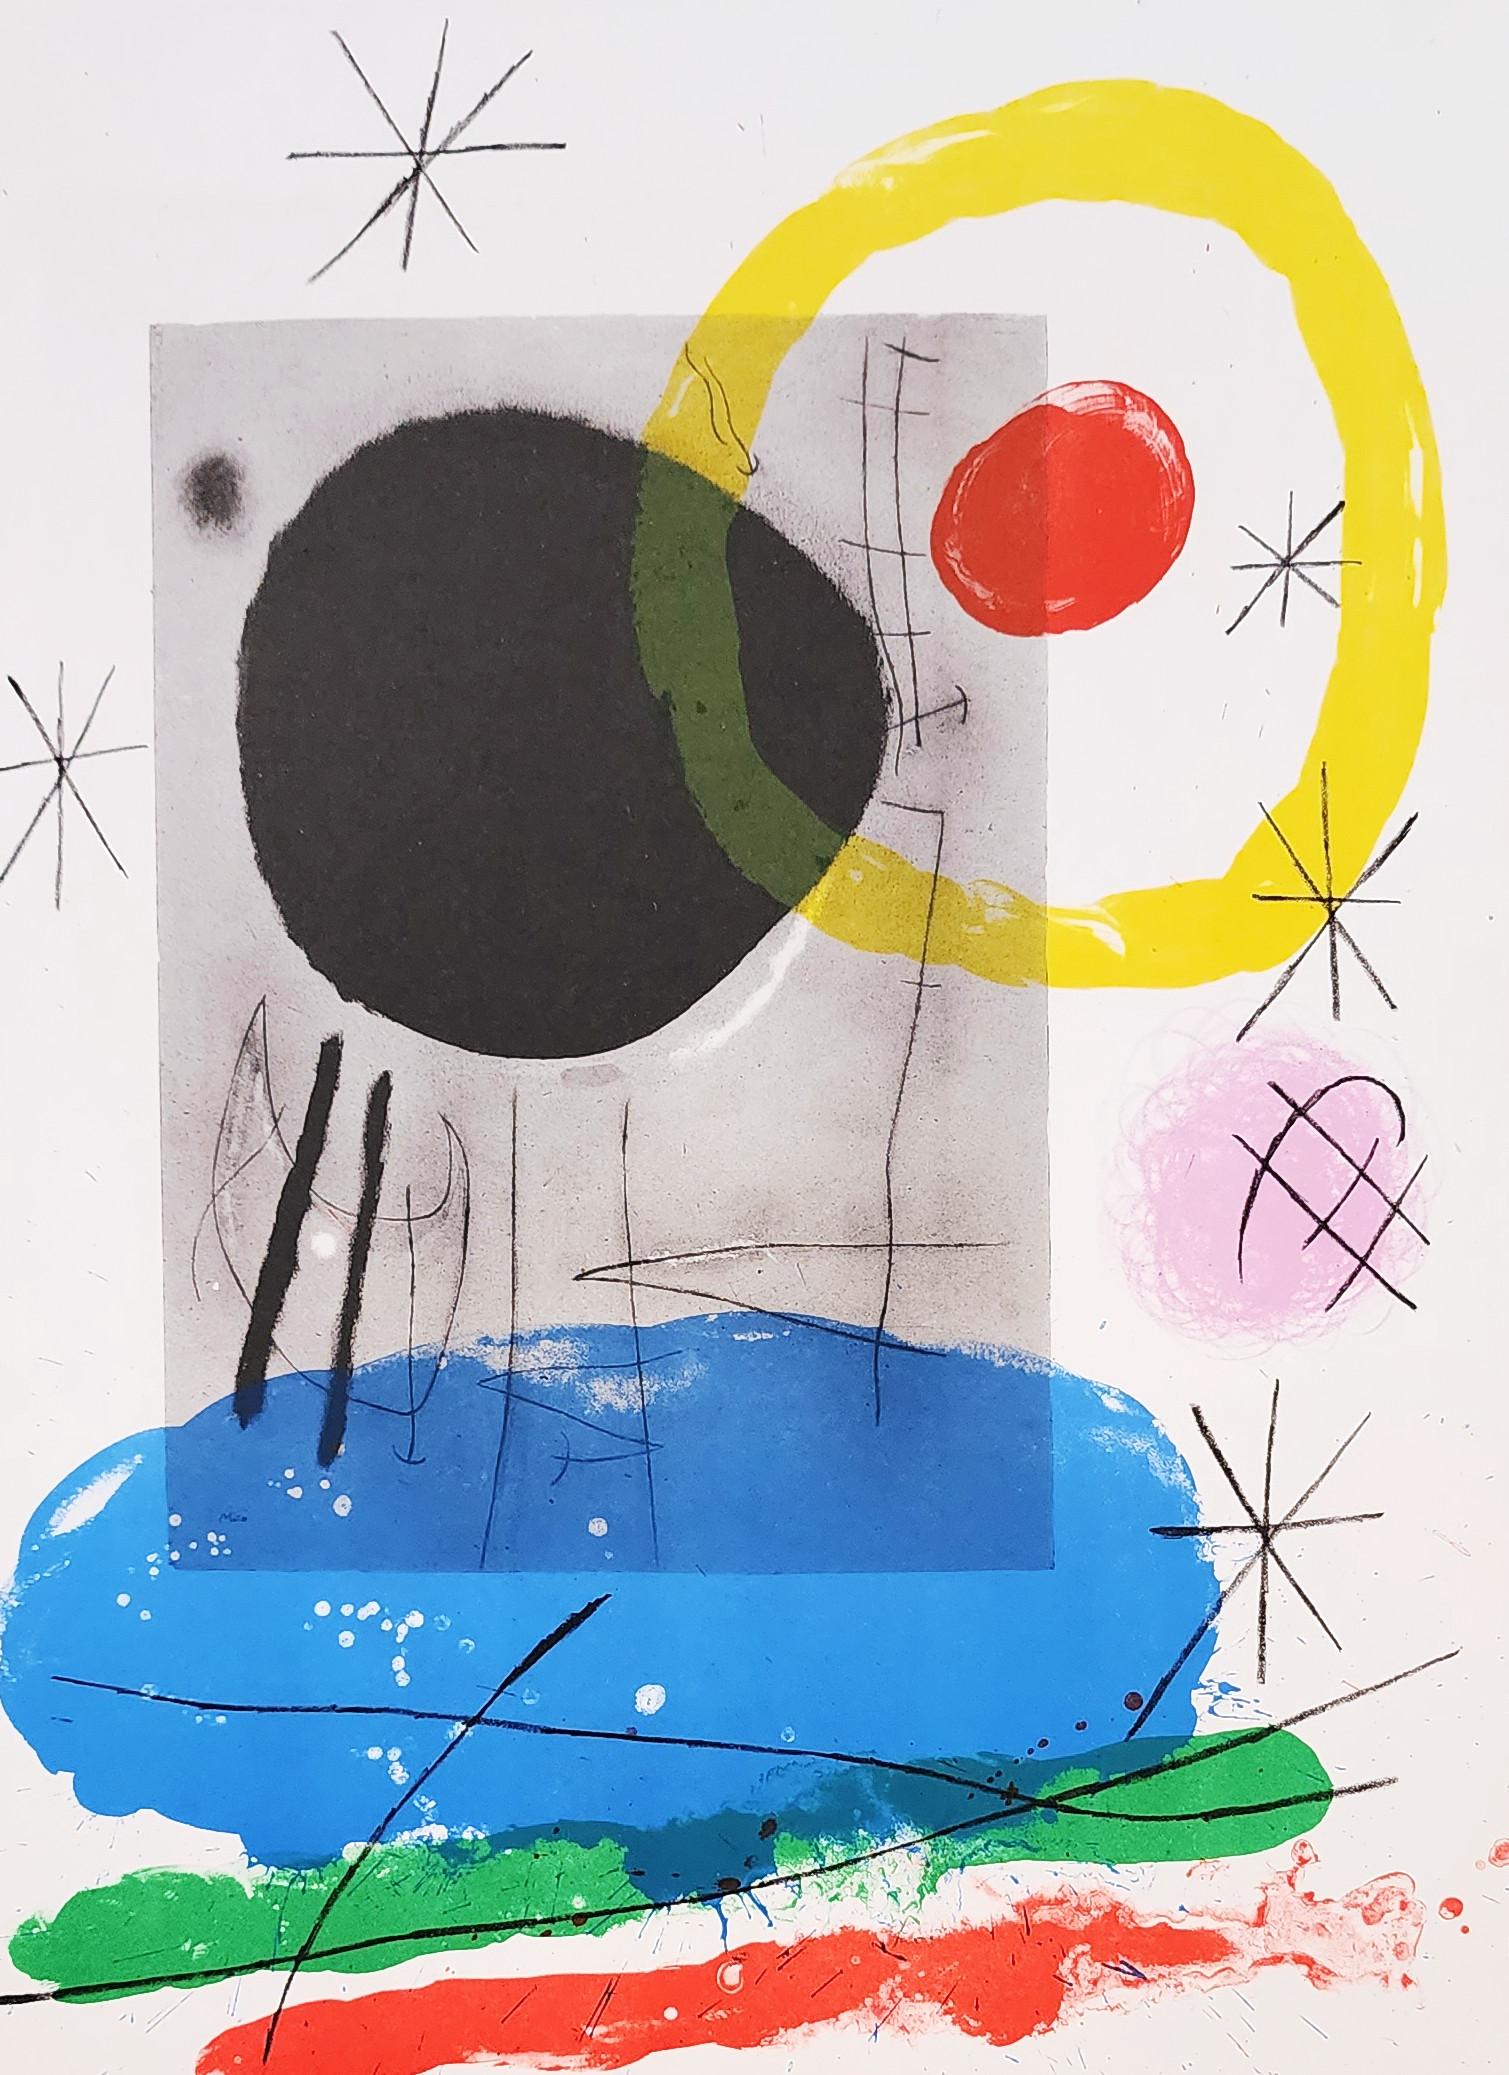 Lithographier Originale (Les Peintures Sur Carton) (Abstract, Fun, Gestural) - Abstract Expressionist Print by Joan Miró